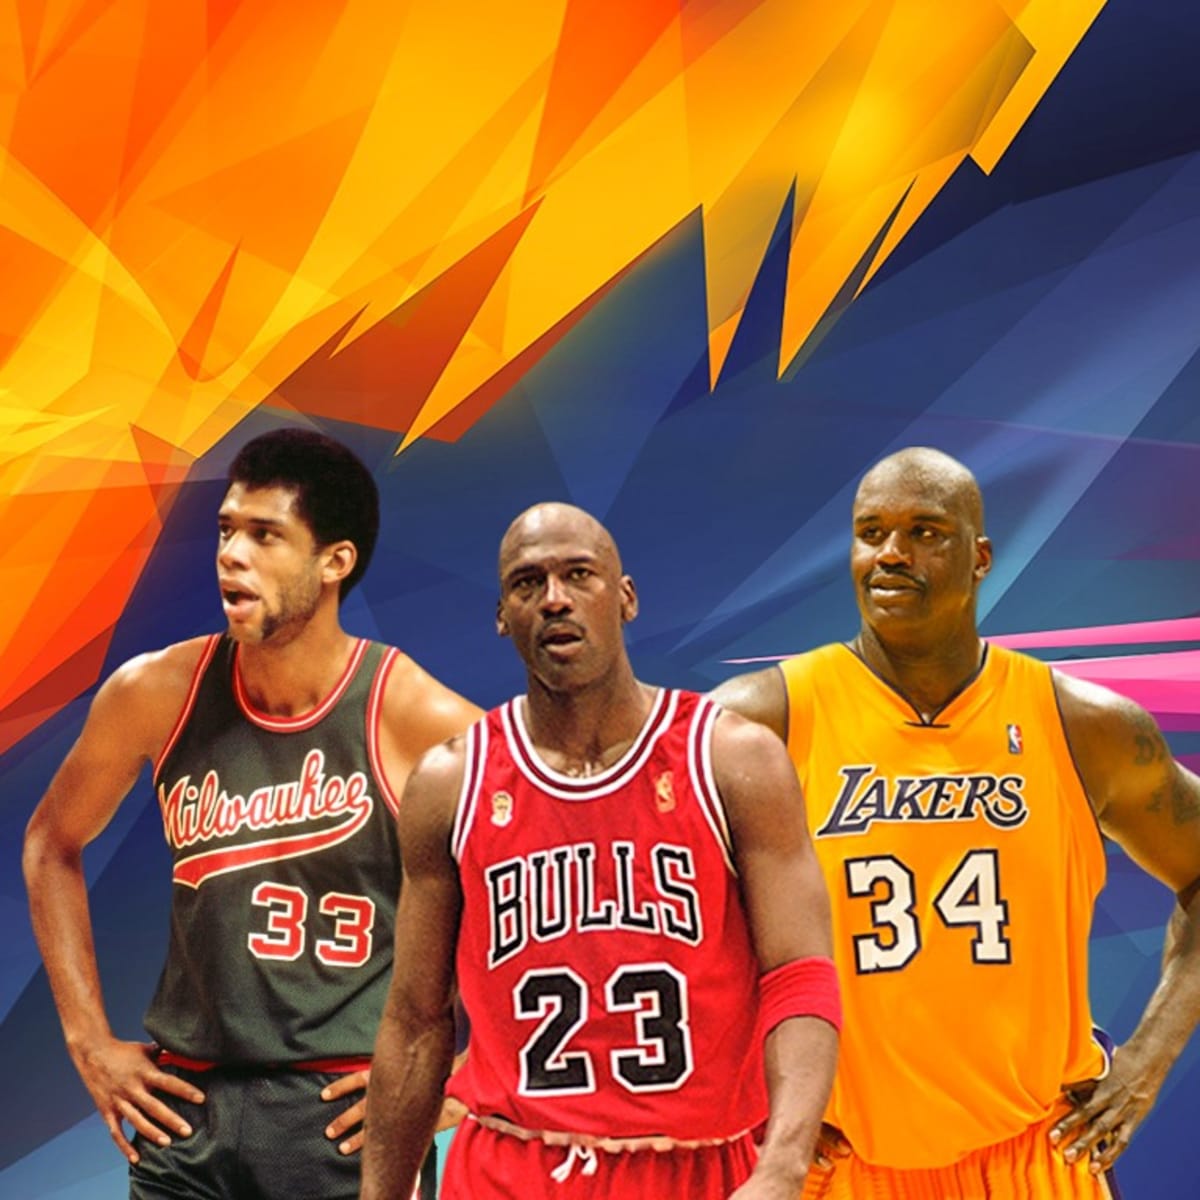 Top 10 NBA Players With The Most Finals And Regular Season MVPs